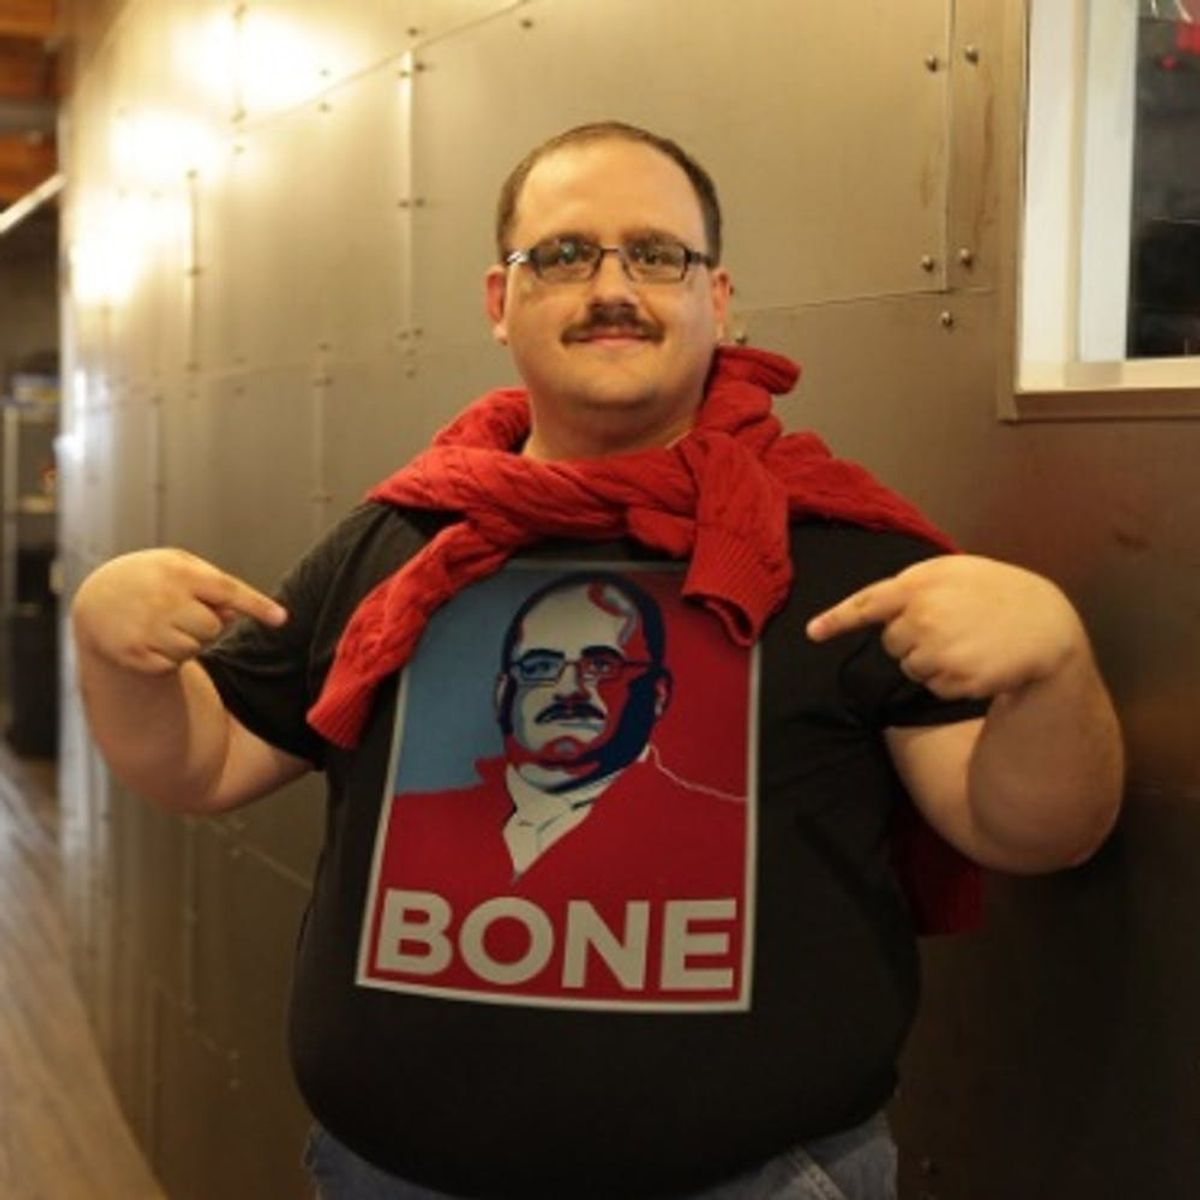 Revelations from Ken Bone’s Past Are Seriously Disturbing